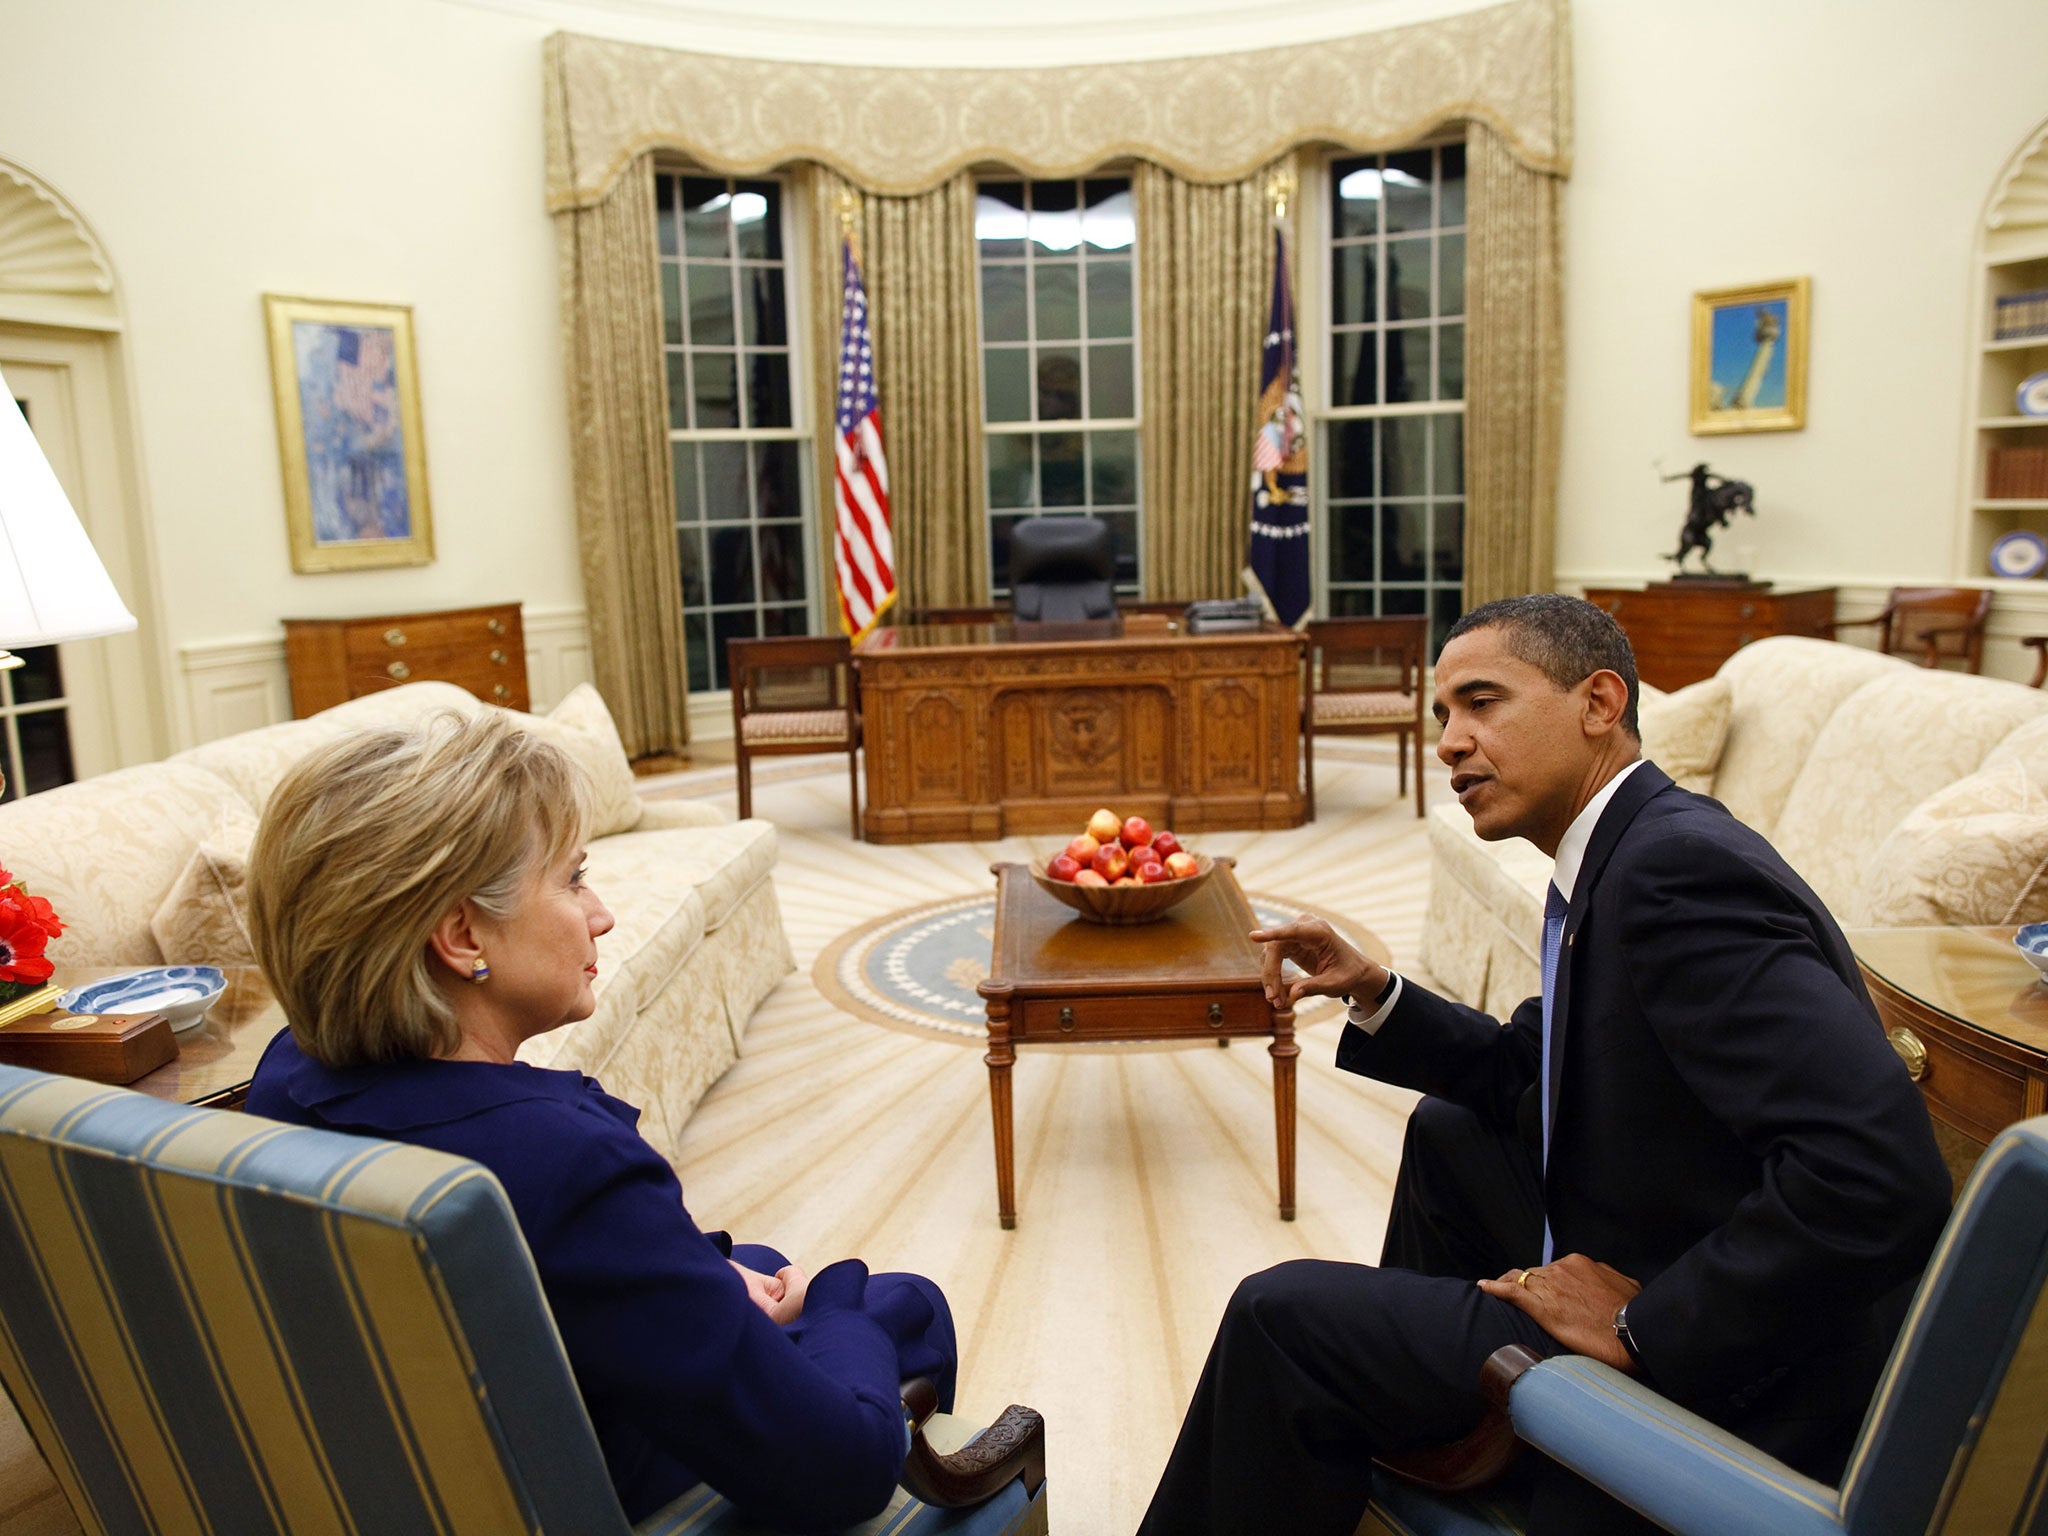 President Barack Obama meets with Secretary of State Hillary Clinton in the Oval Office shortly after she was confirmed and sworn in, in 2009